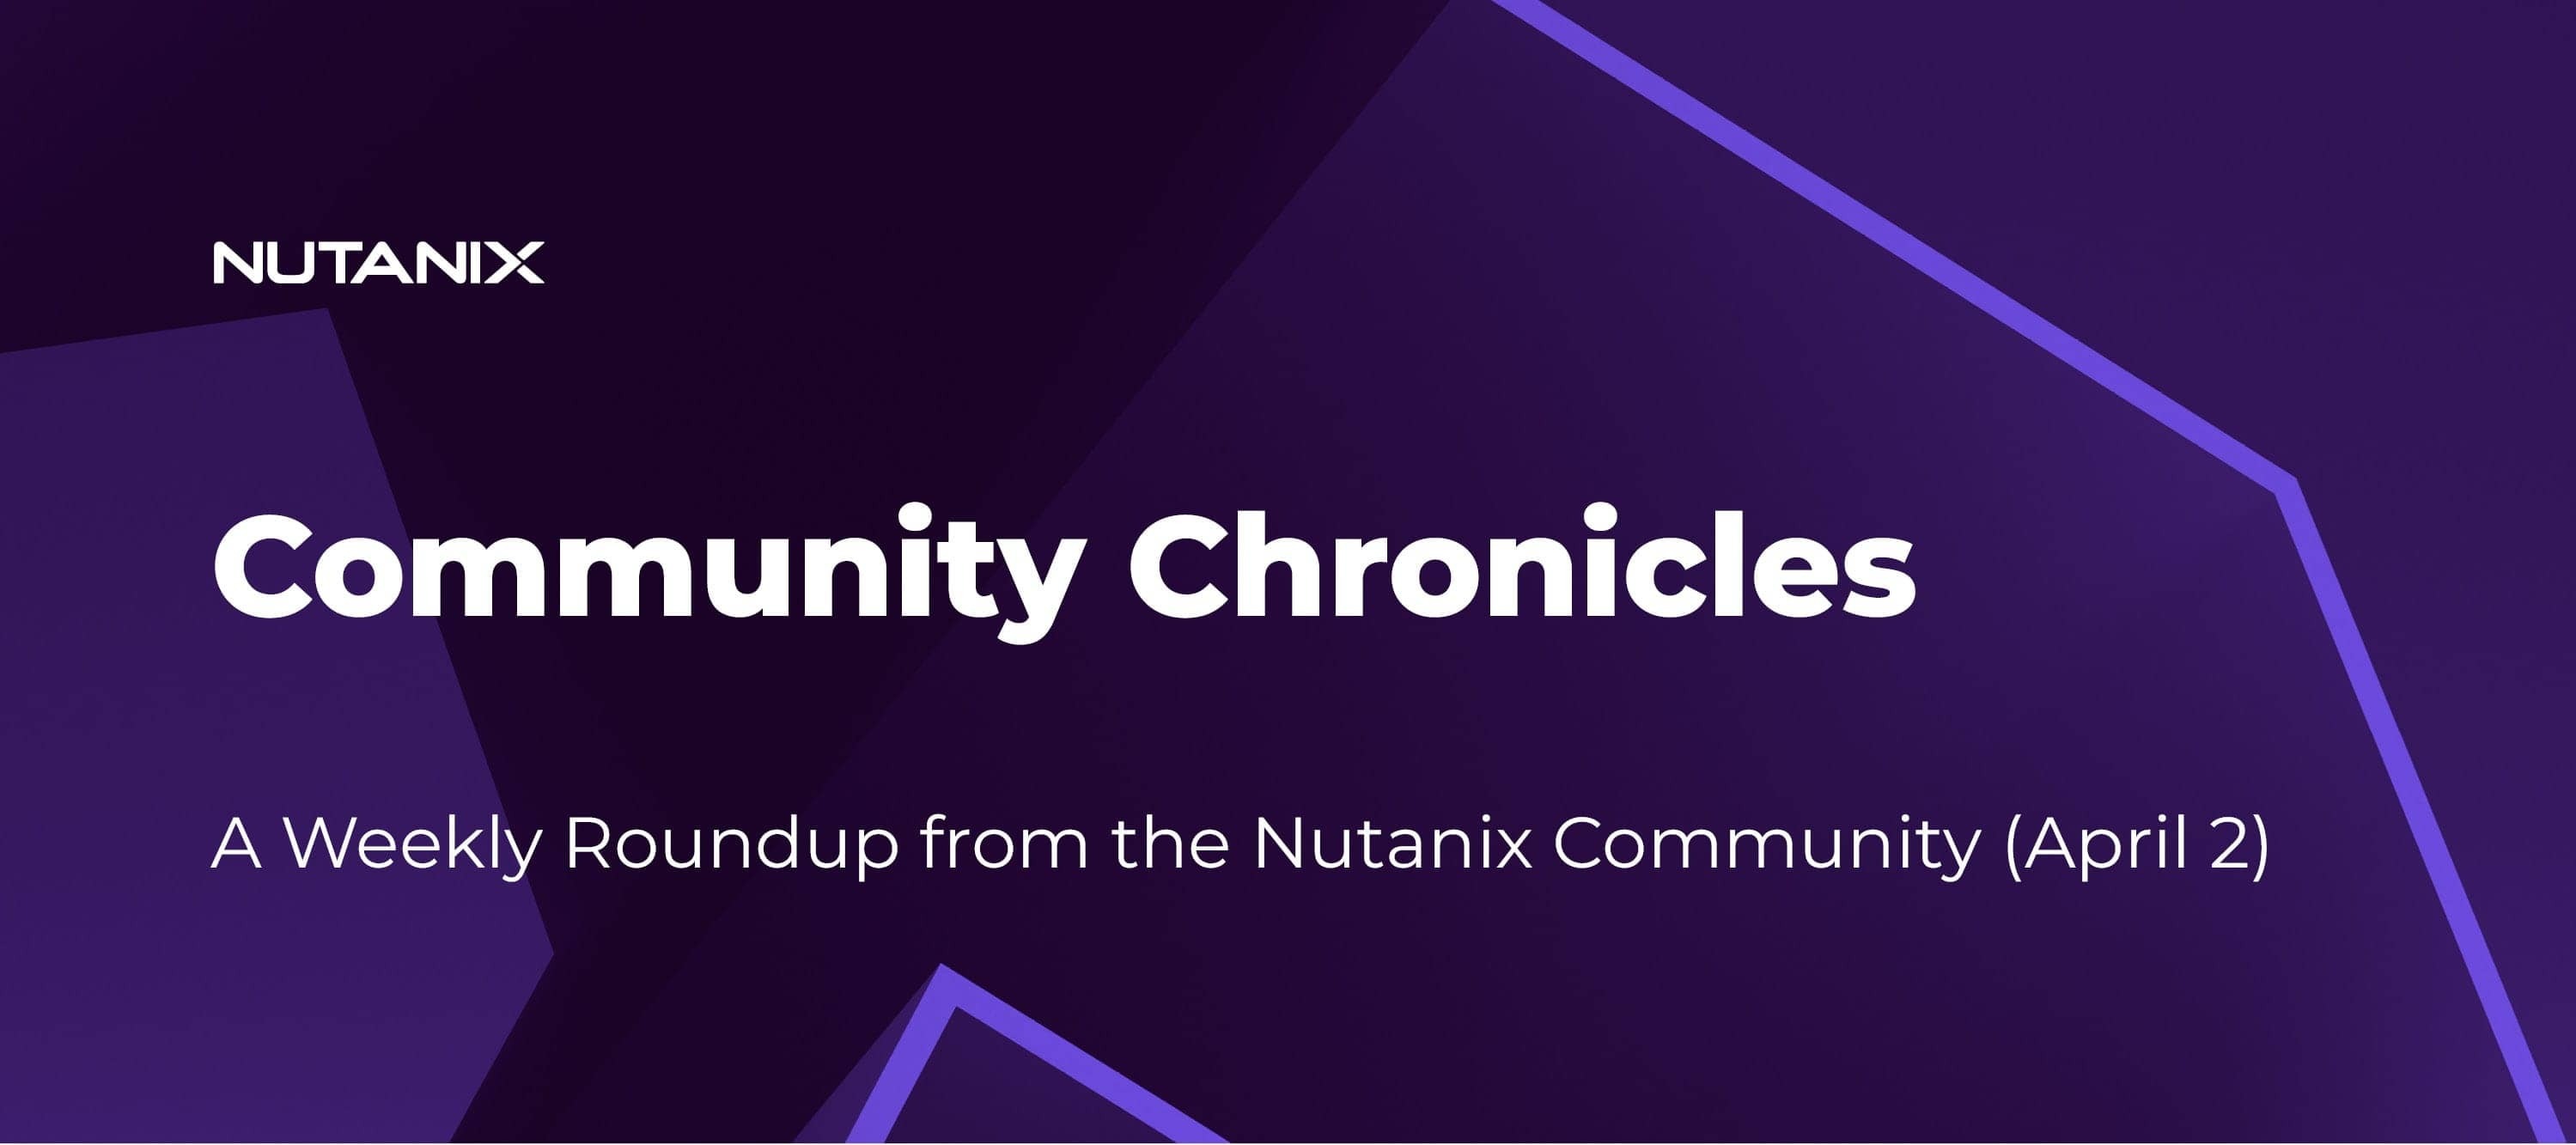 Community Chronicles: A Weekly Roundup from the Nutanix Community (April 2)